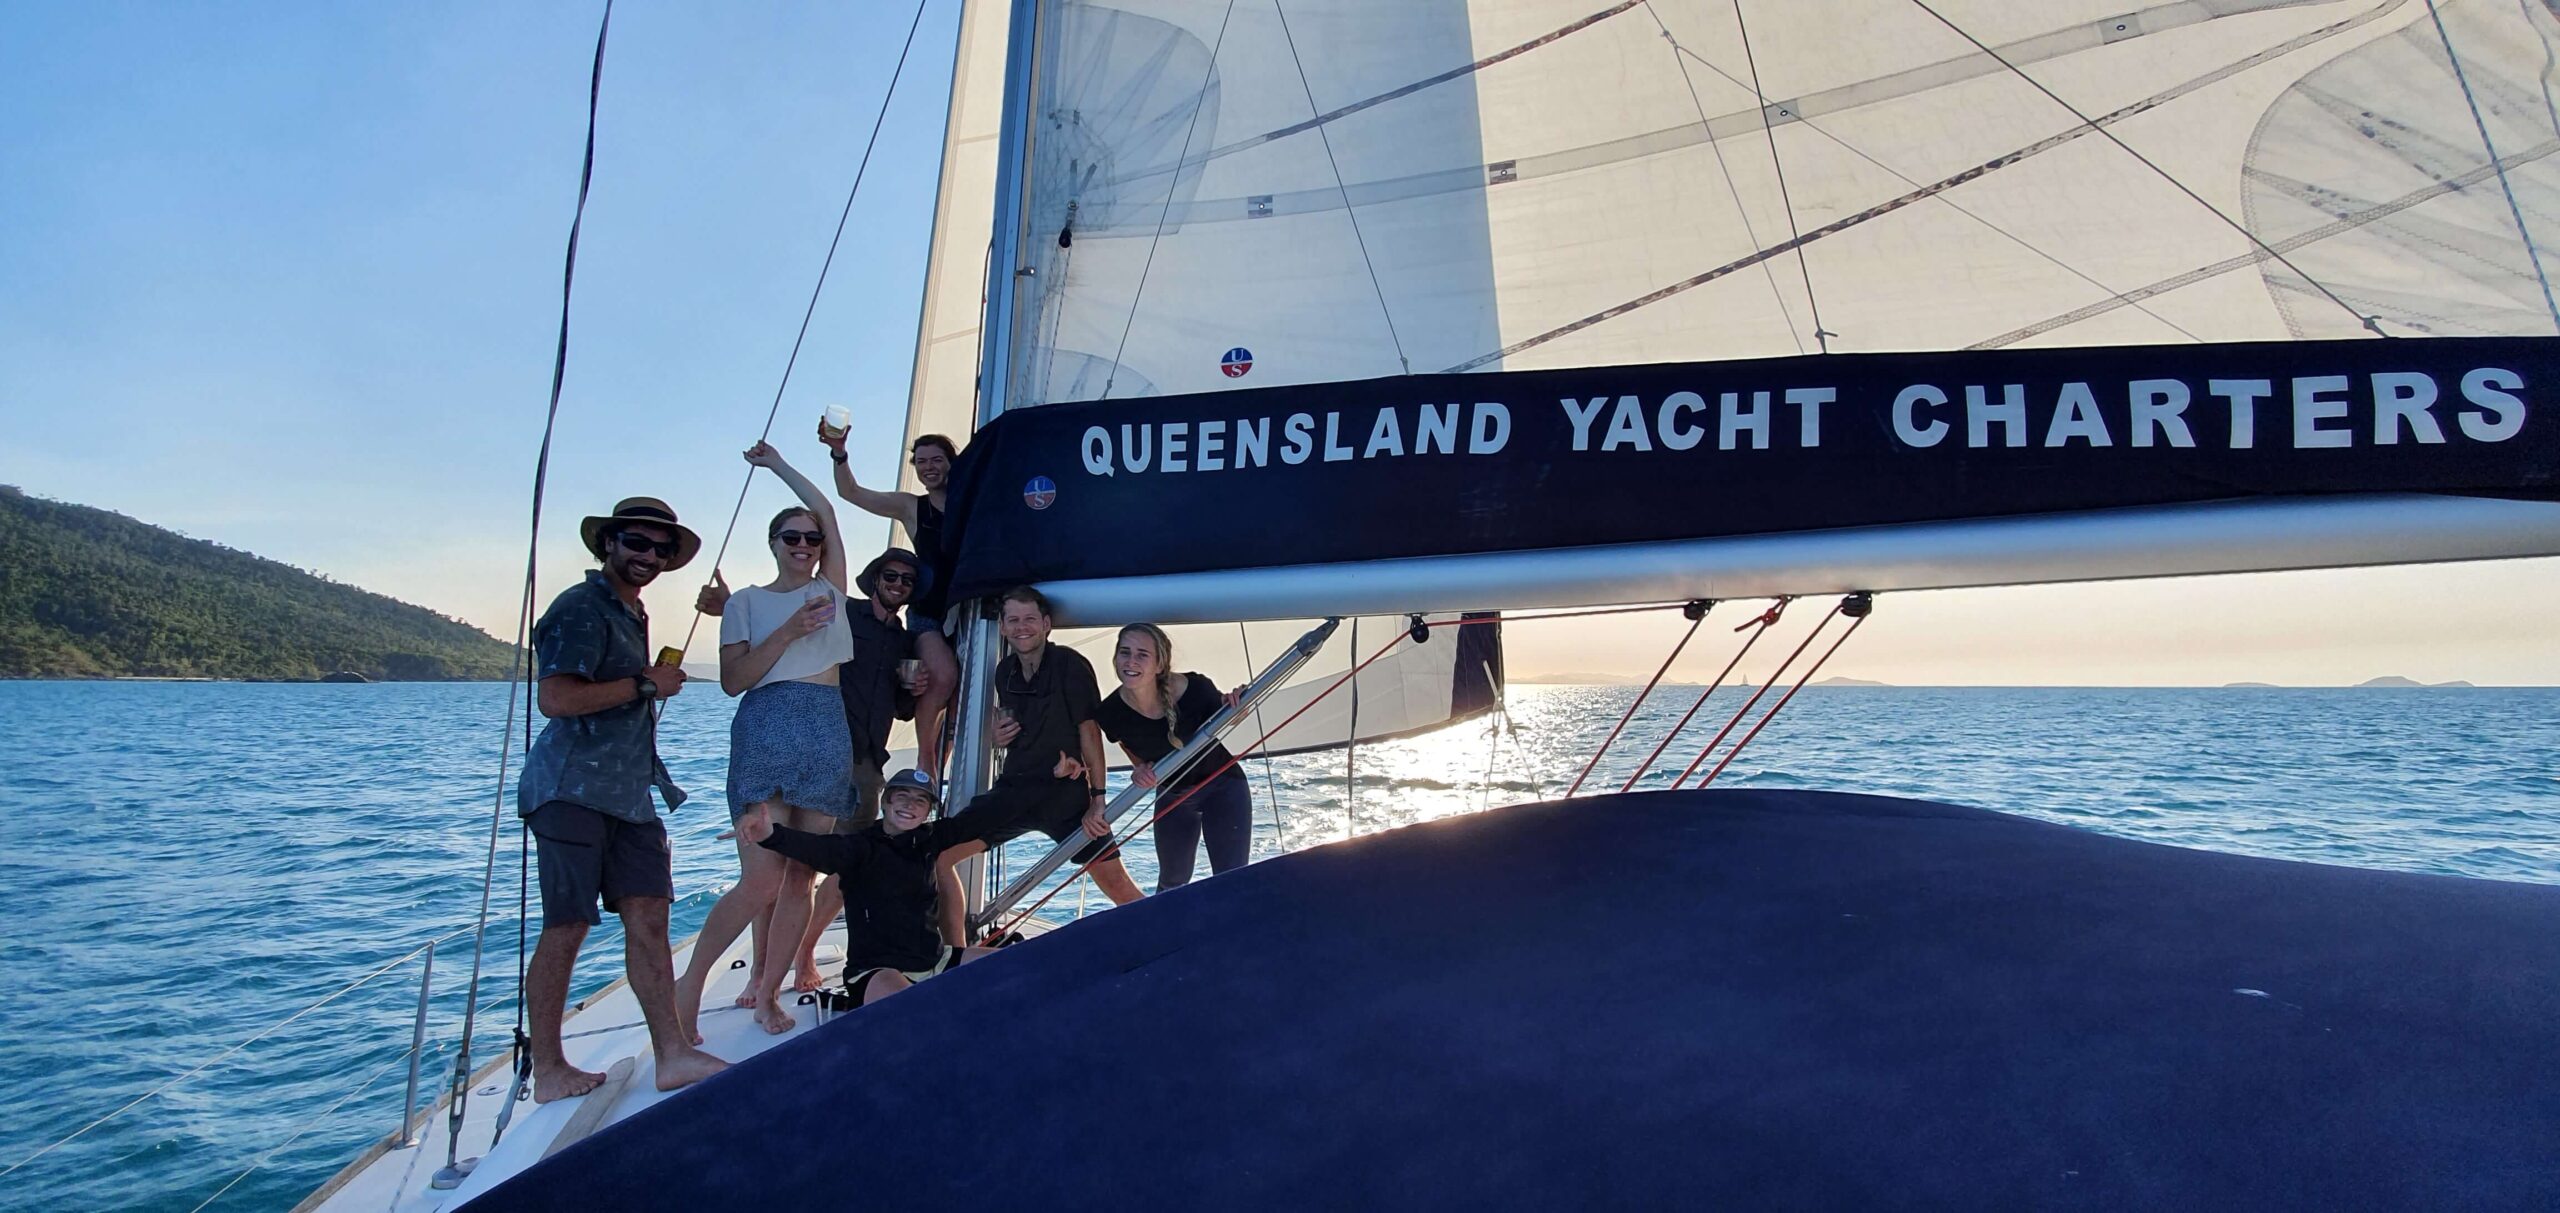 Our group Sailing the Whitsundays. Photo taken by Nick.